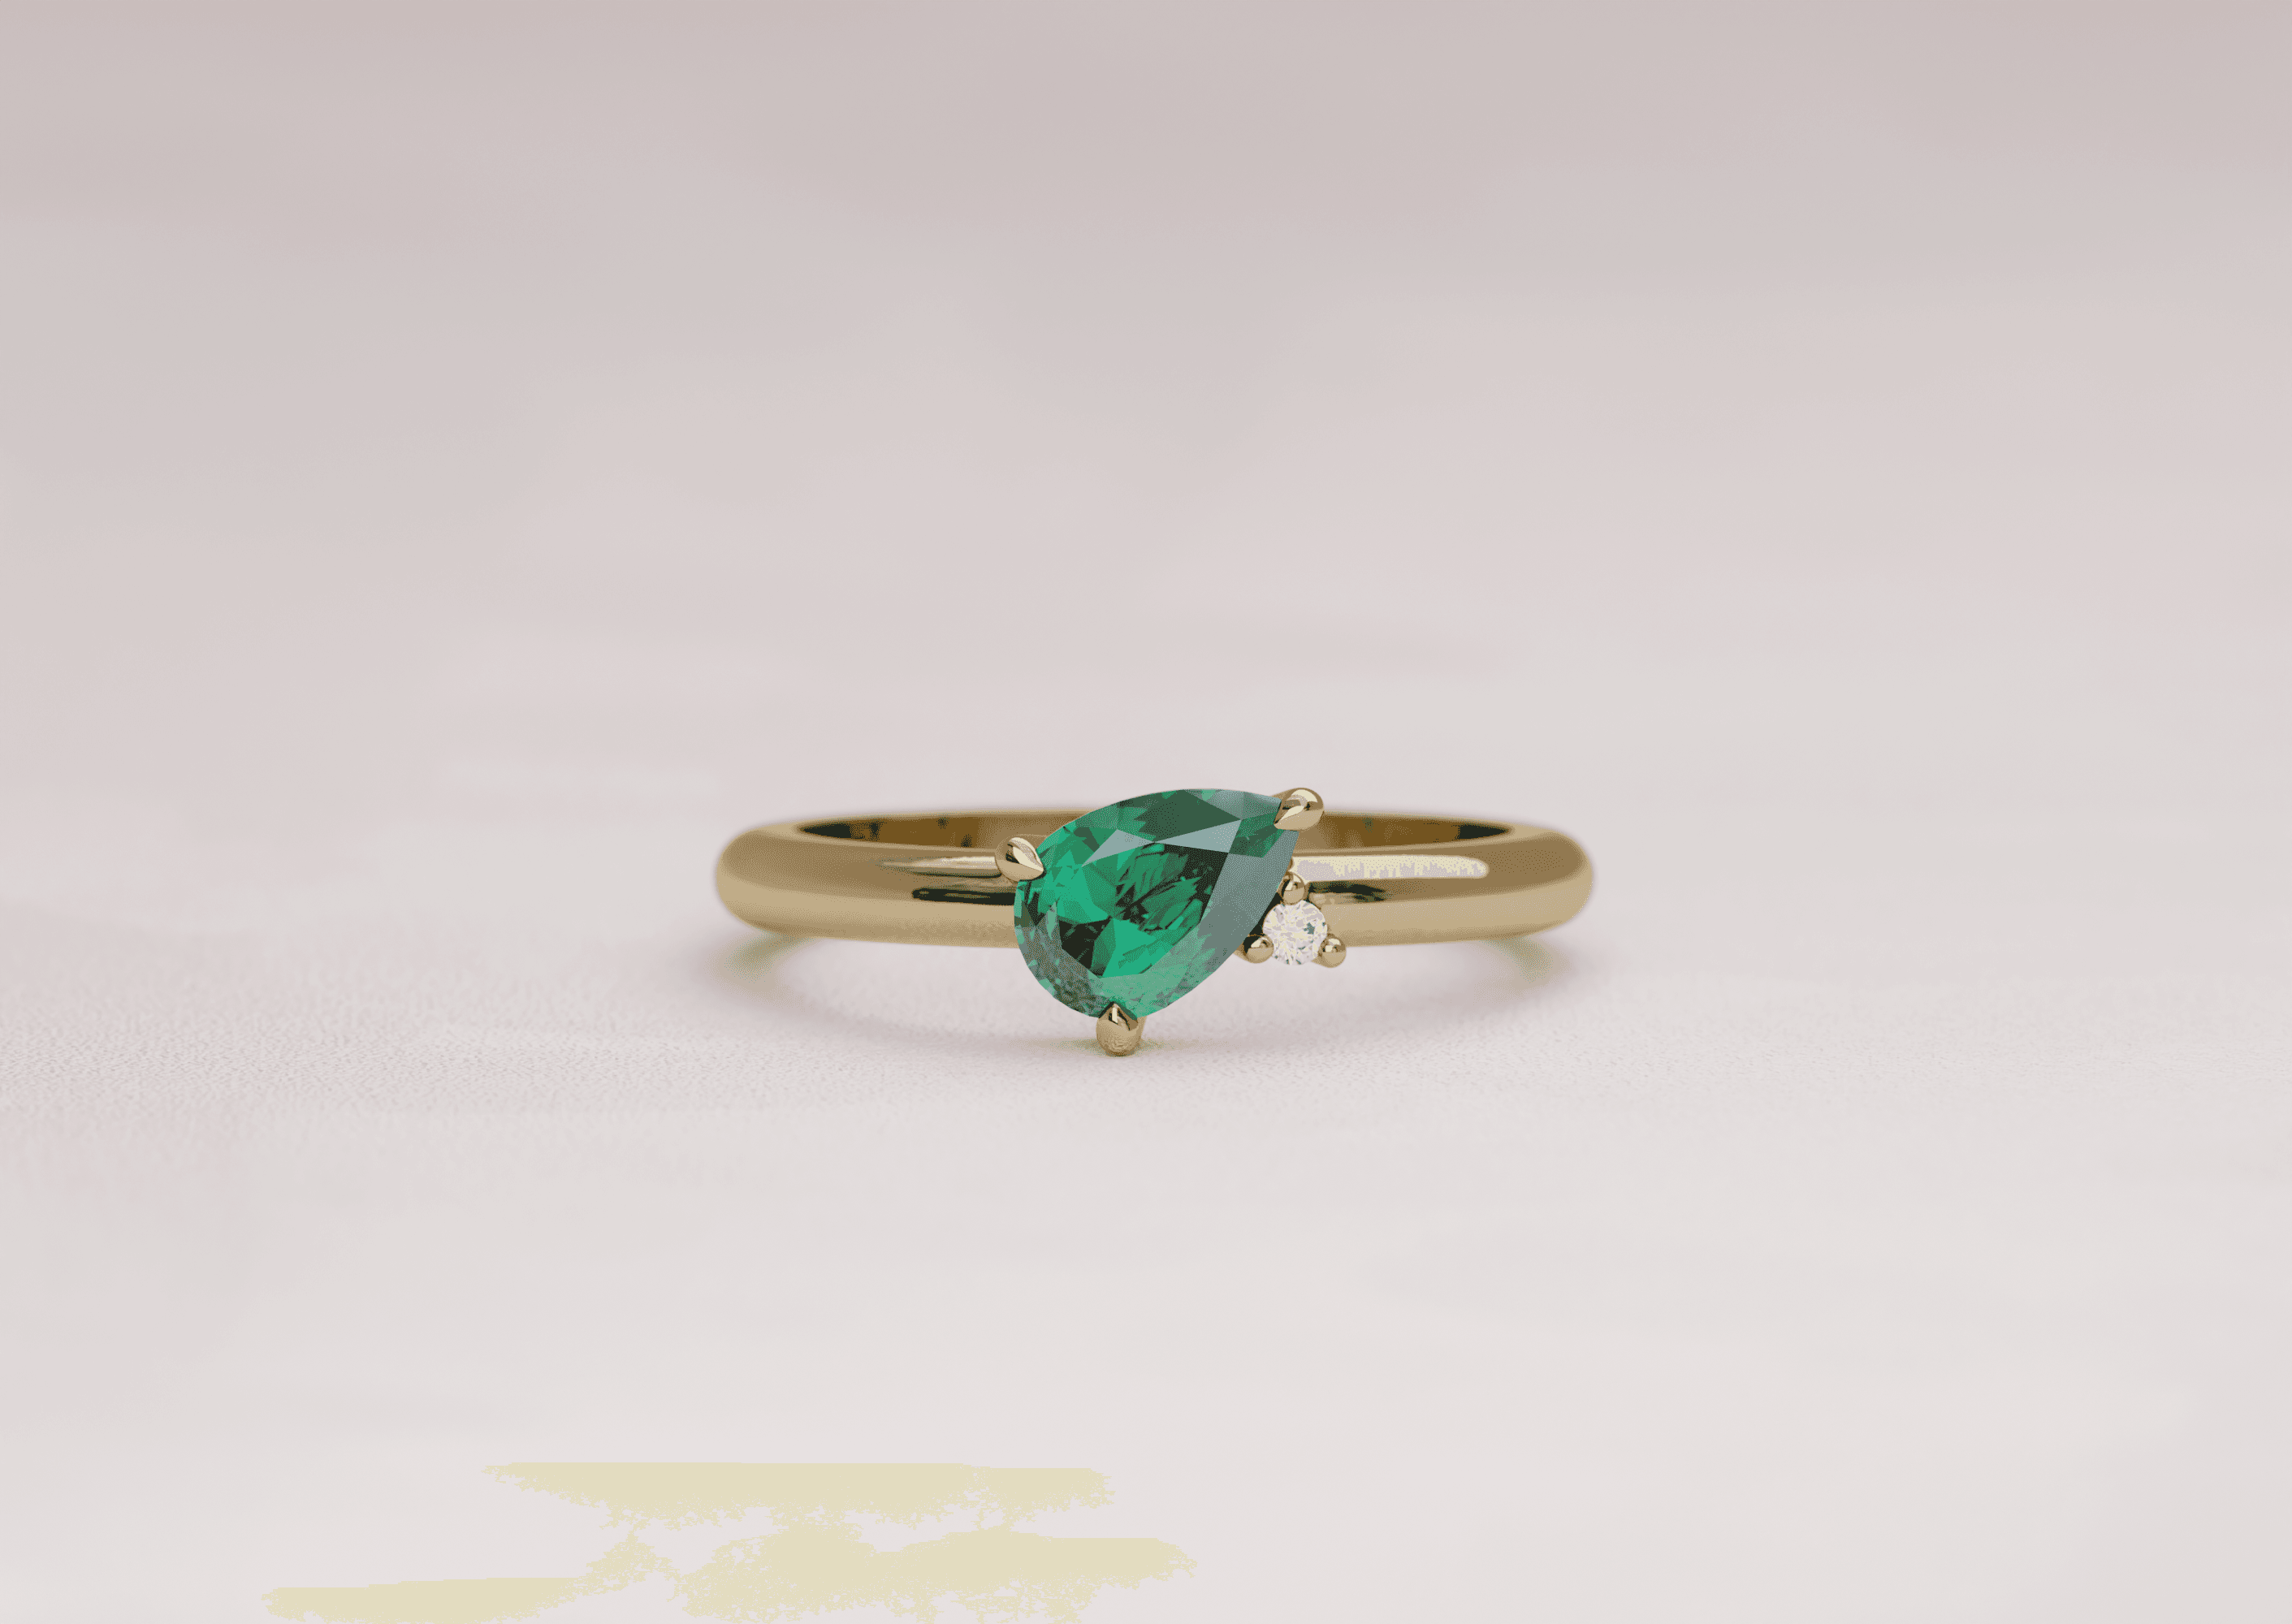 Asymmetric pear cut emerald engagement ring with an accenting round diamond in a yellow gold band